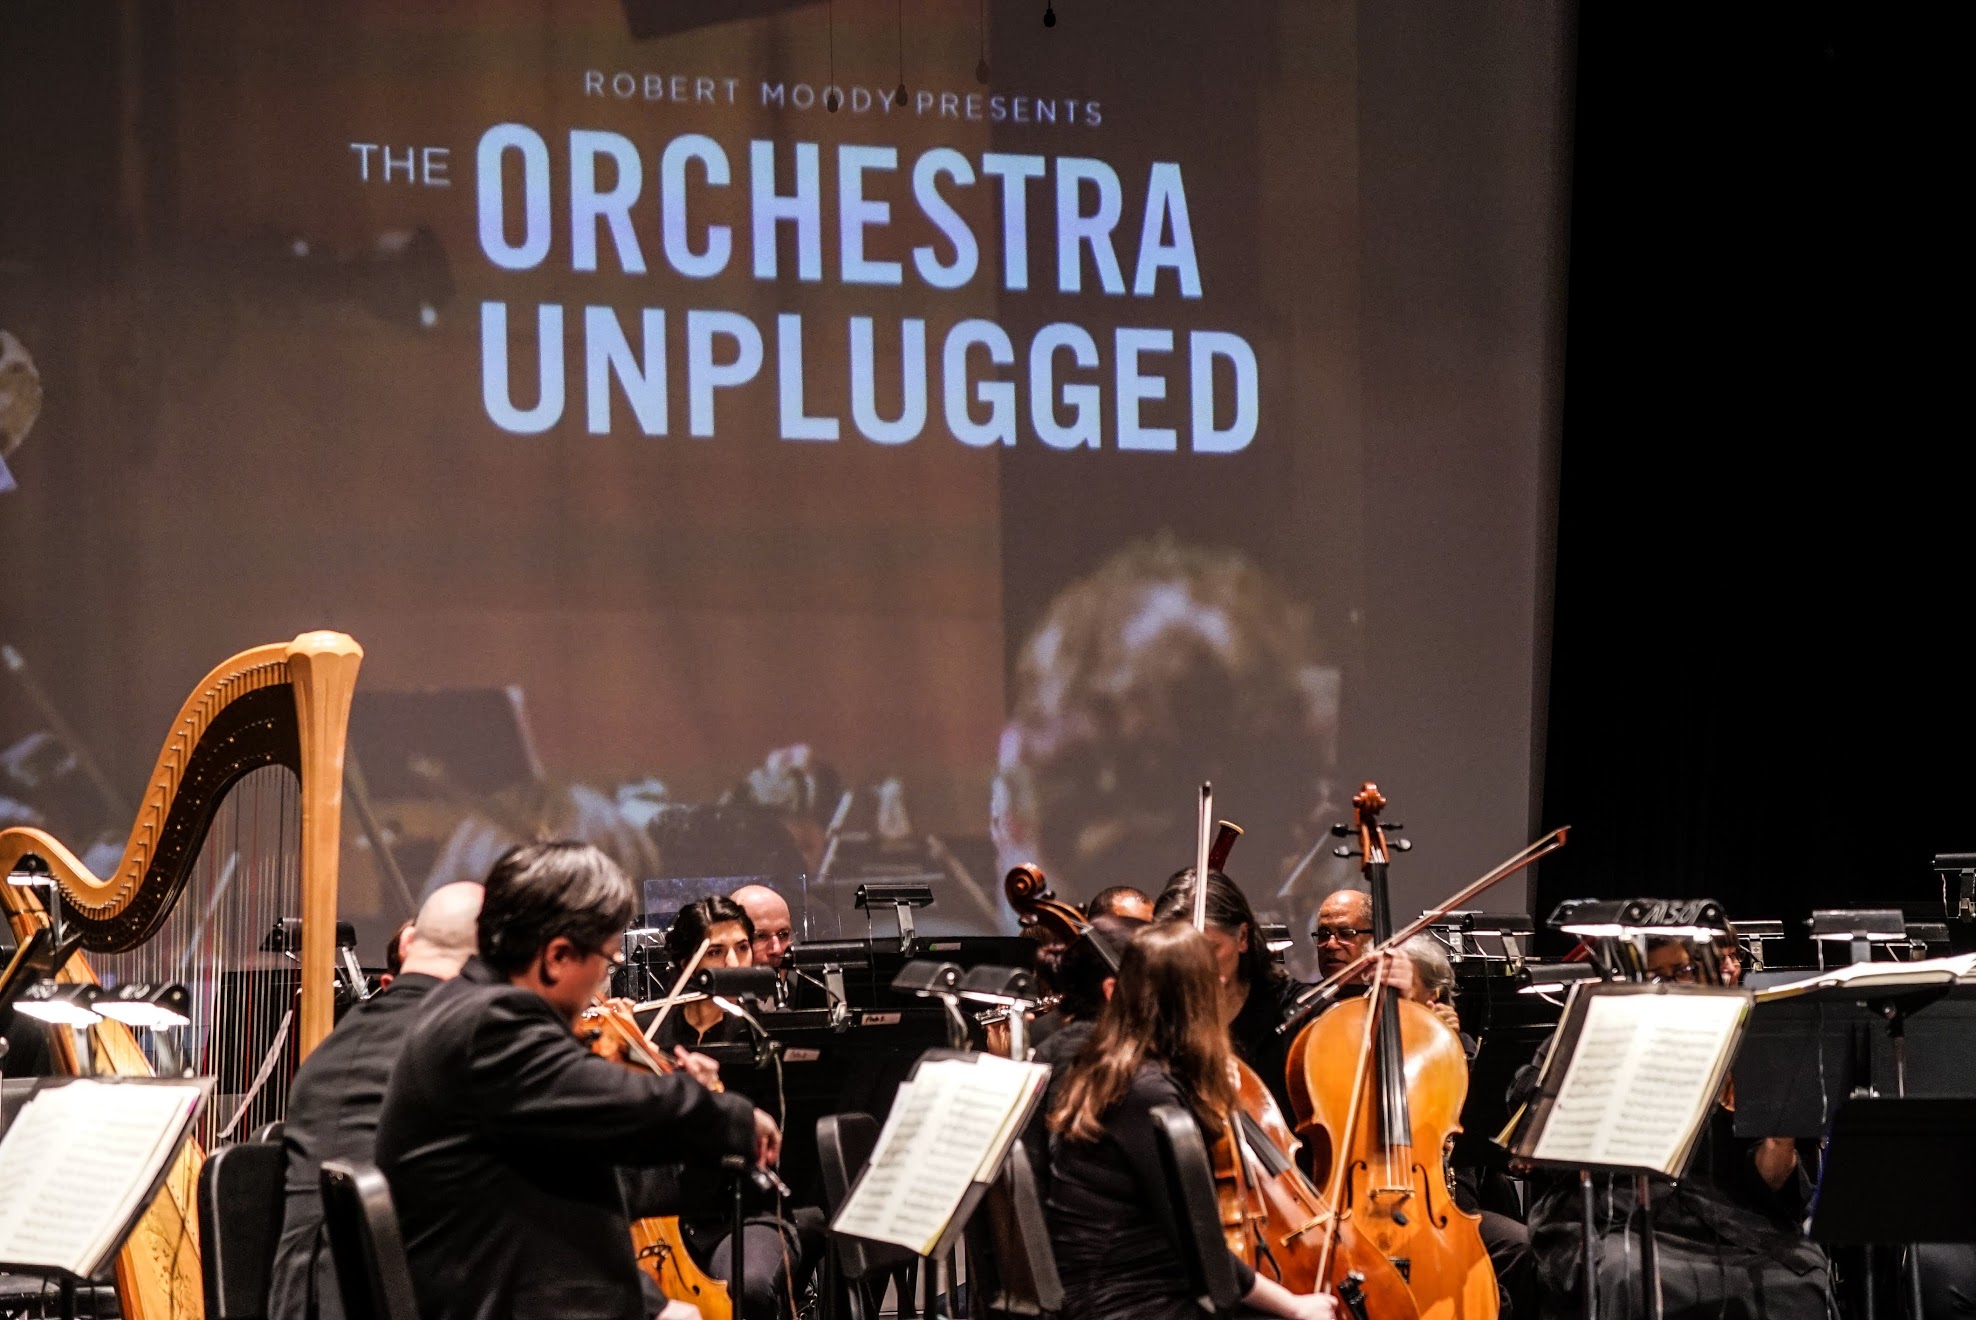 Orchestra playing with Orchestra Unplugged Logo projected onto screen.